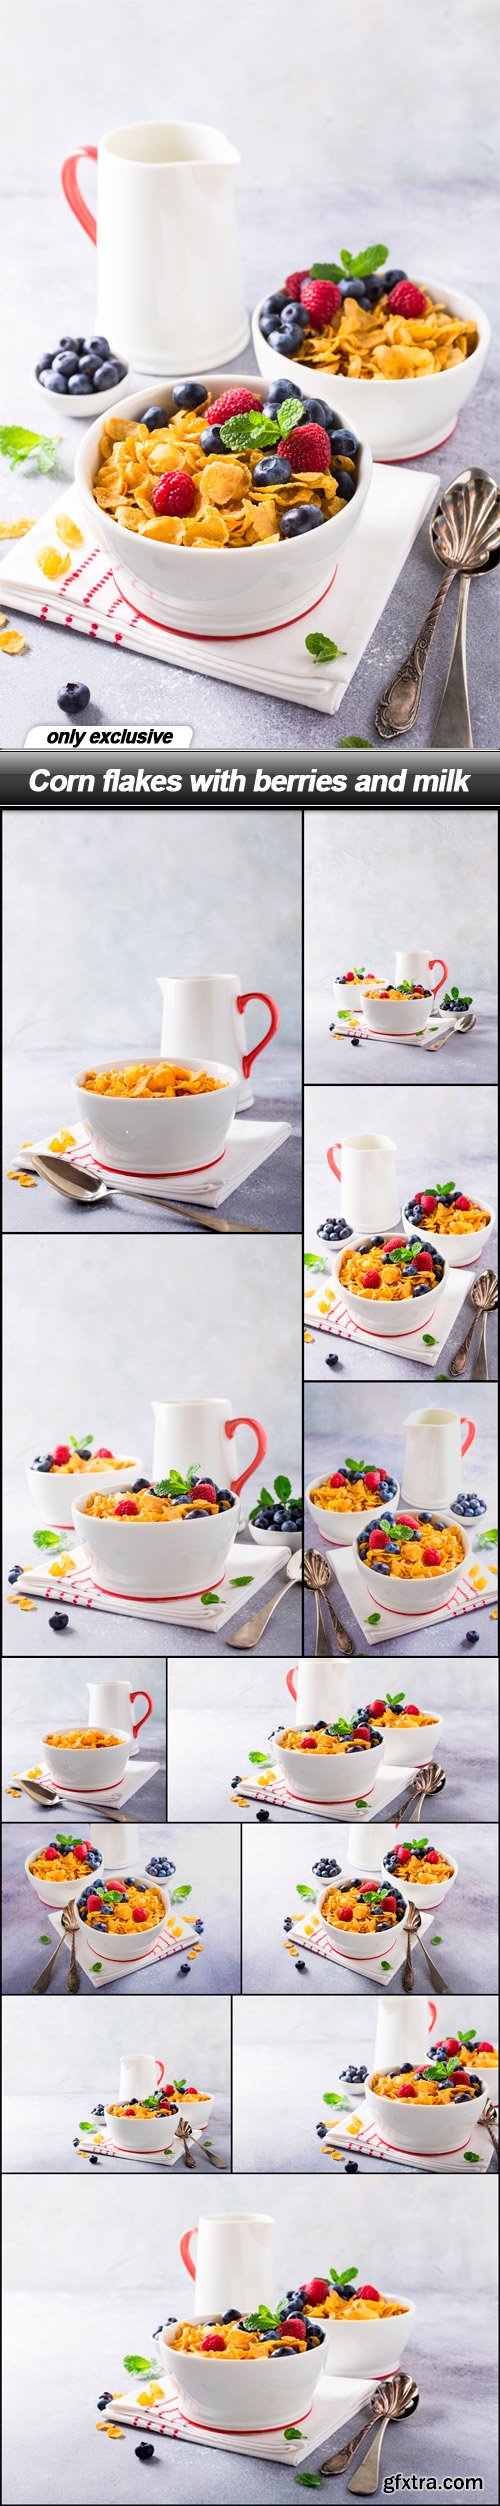 Corn flakes with berries and milk - 14 UHQ JPEG